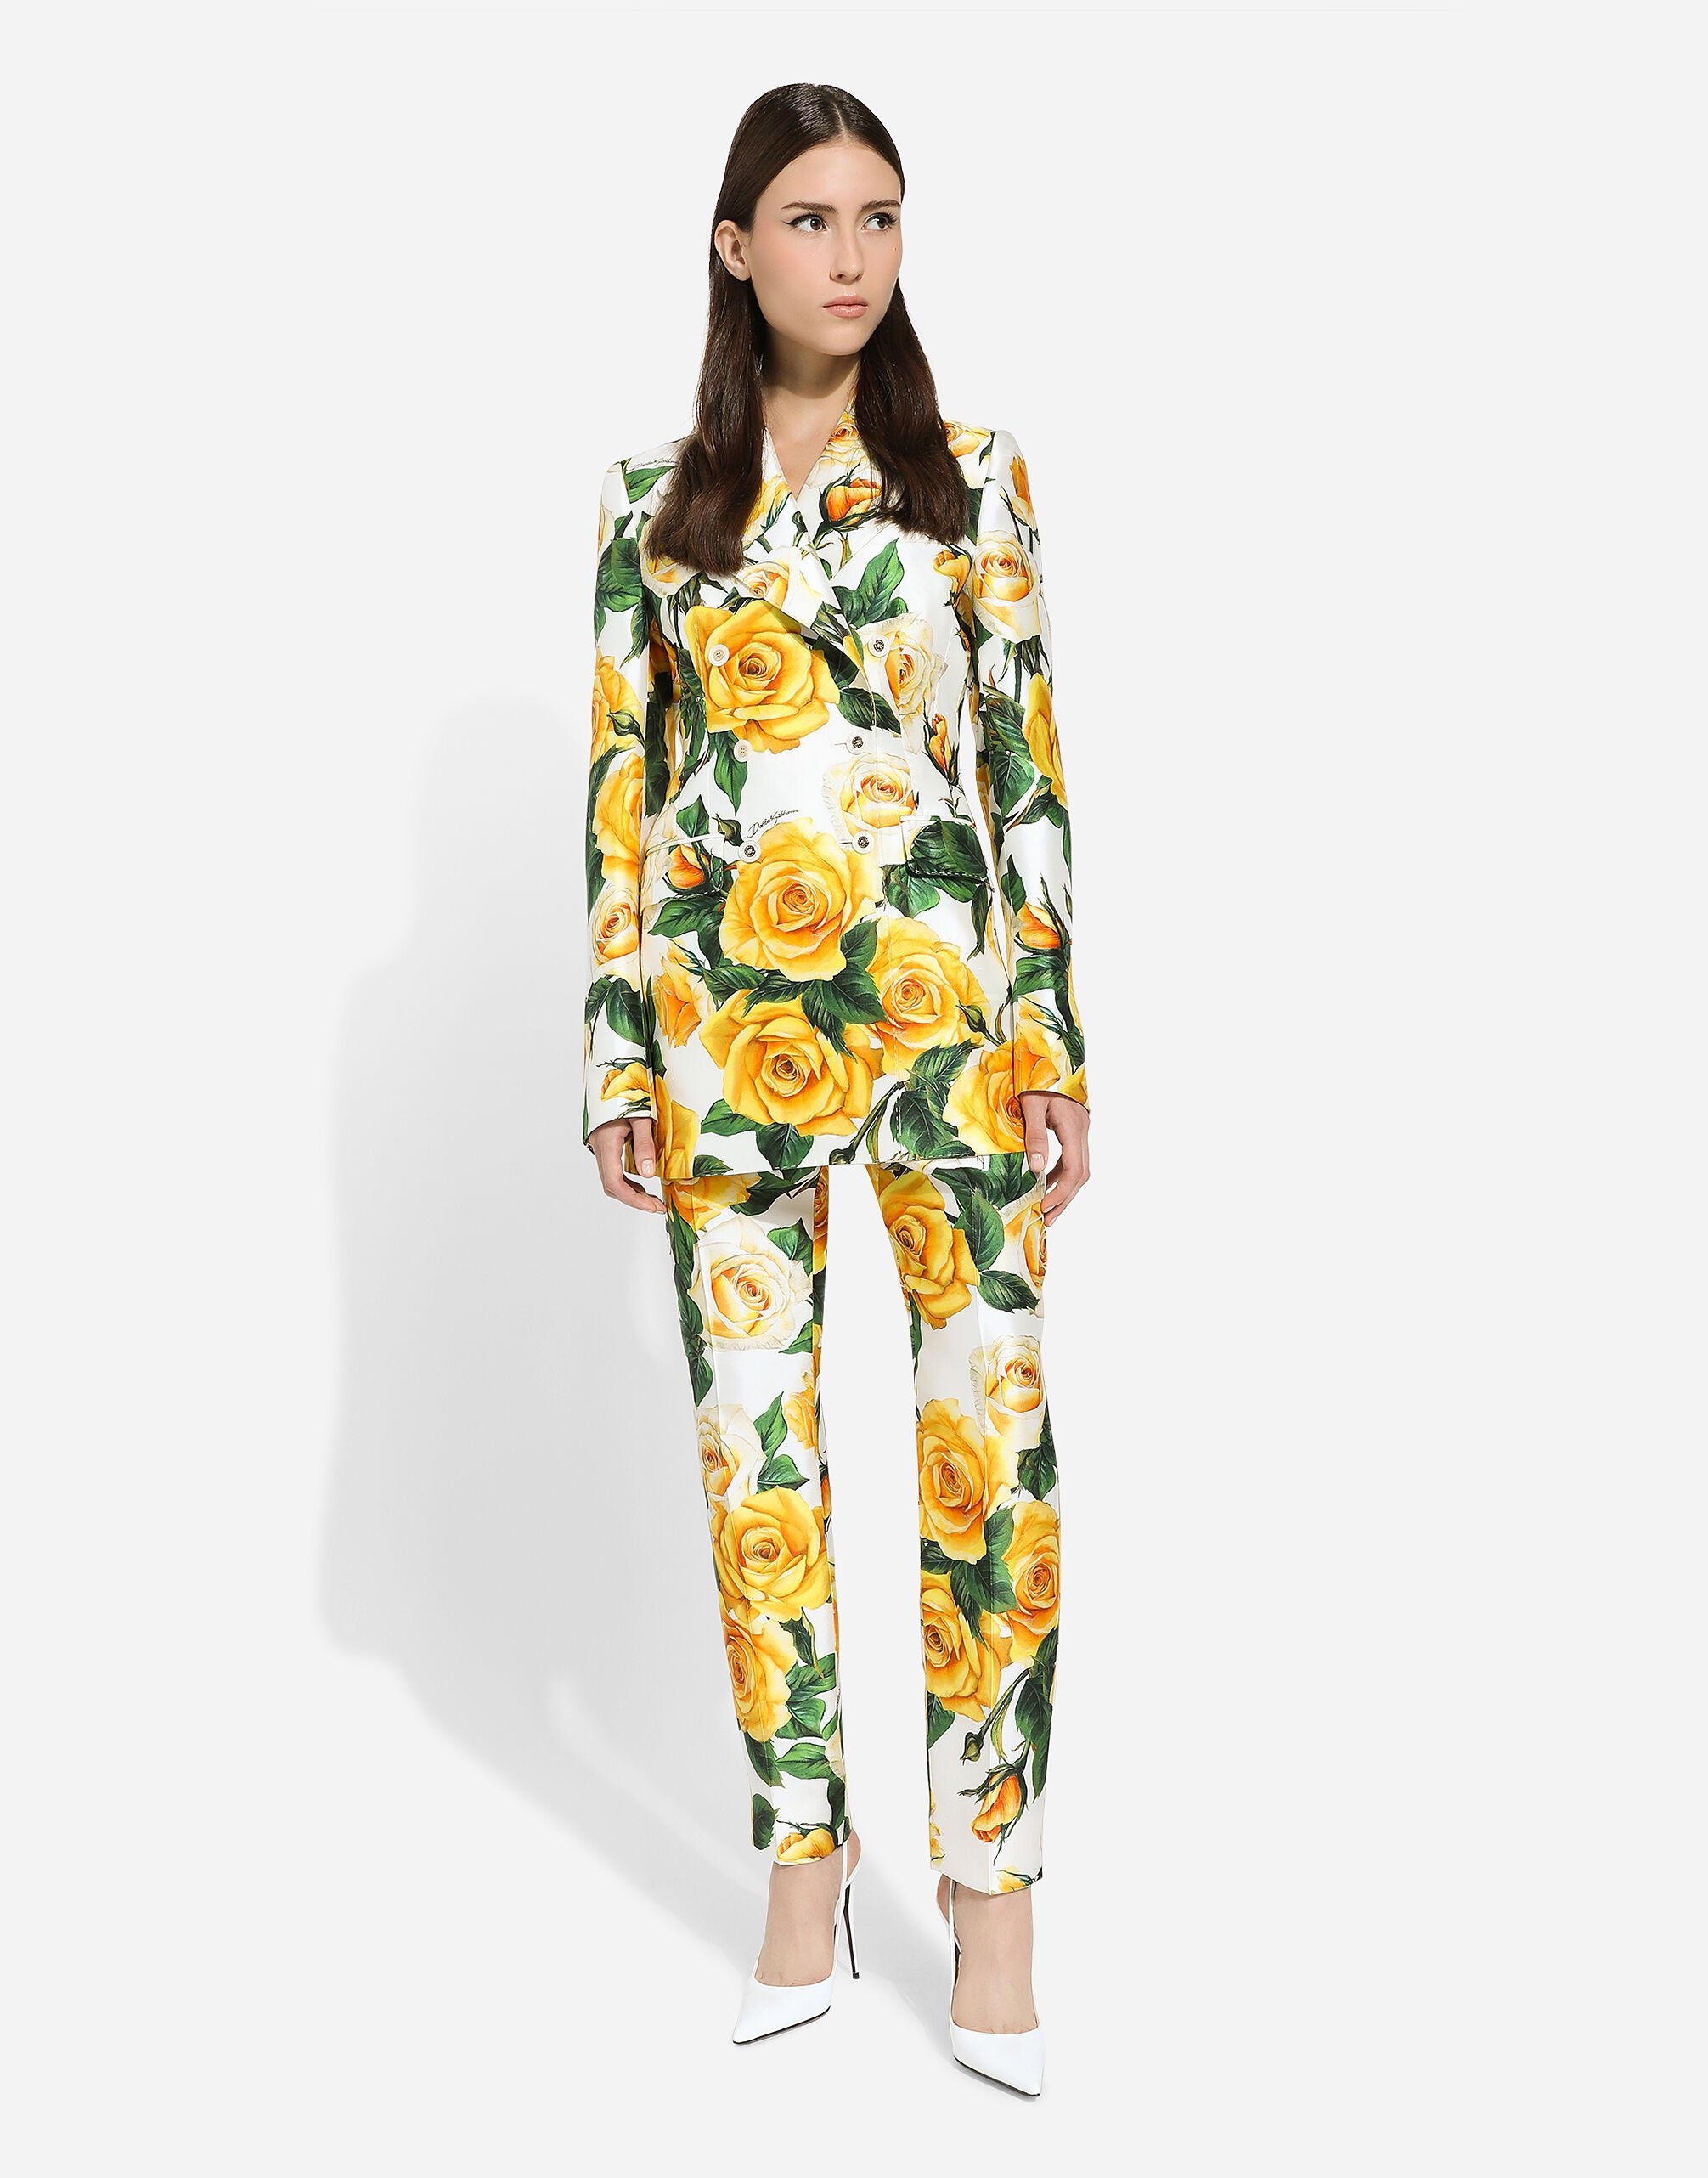 High-waisted mikado pants with yellow rose print - 2